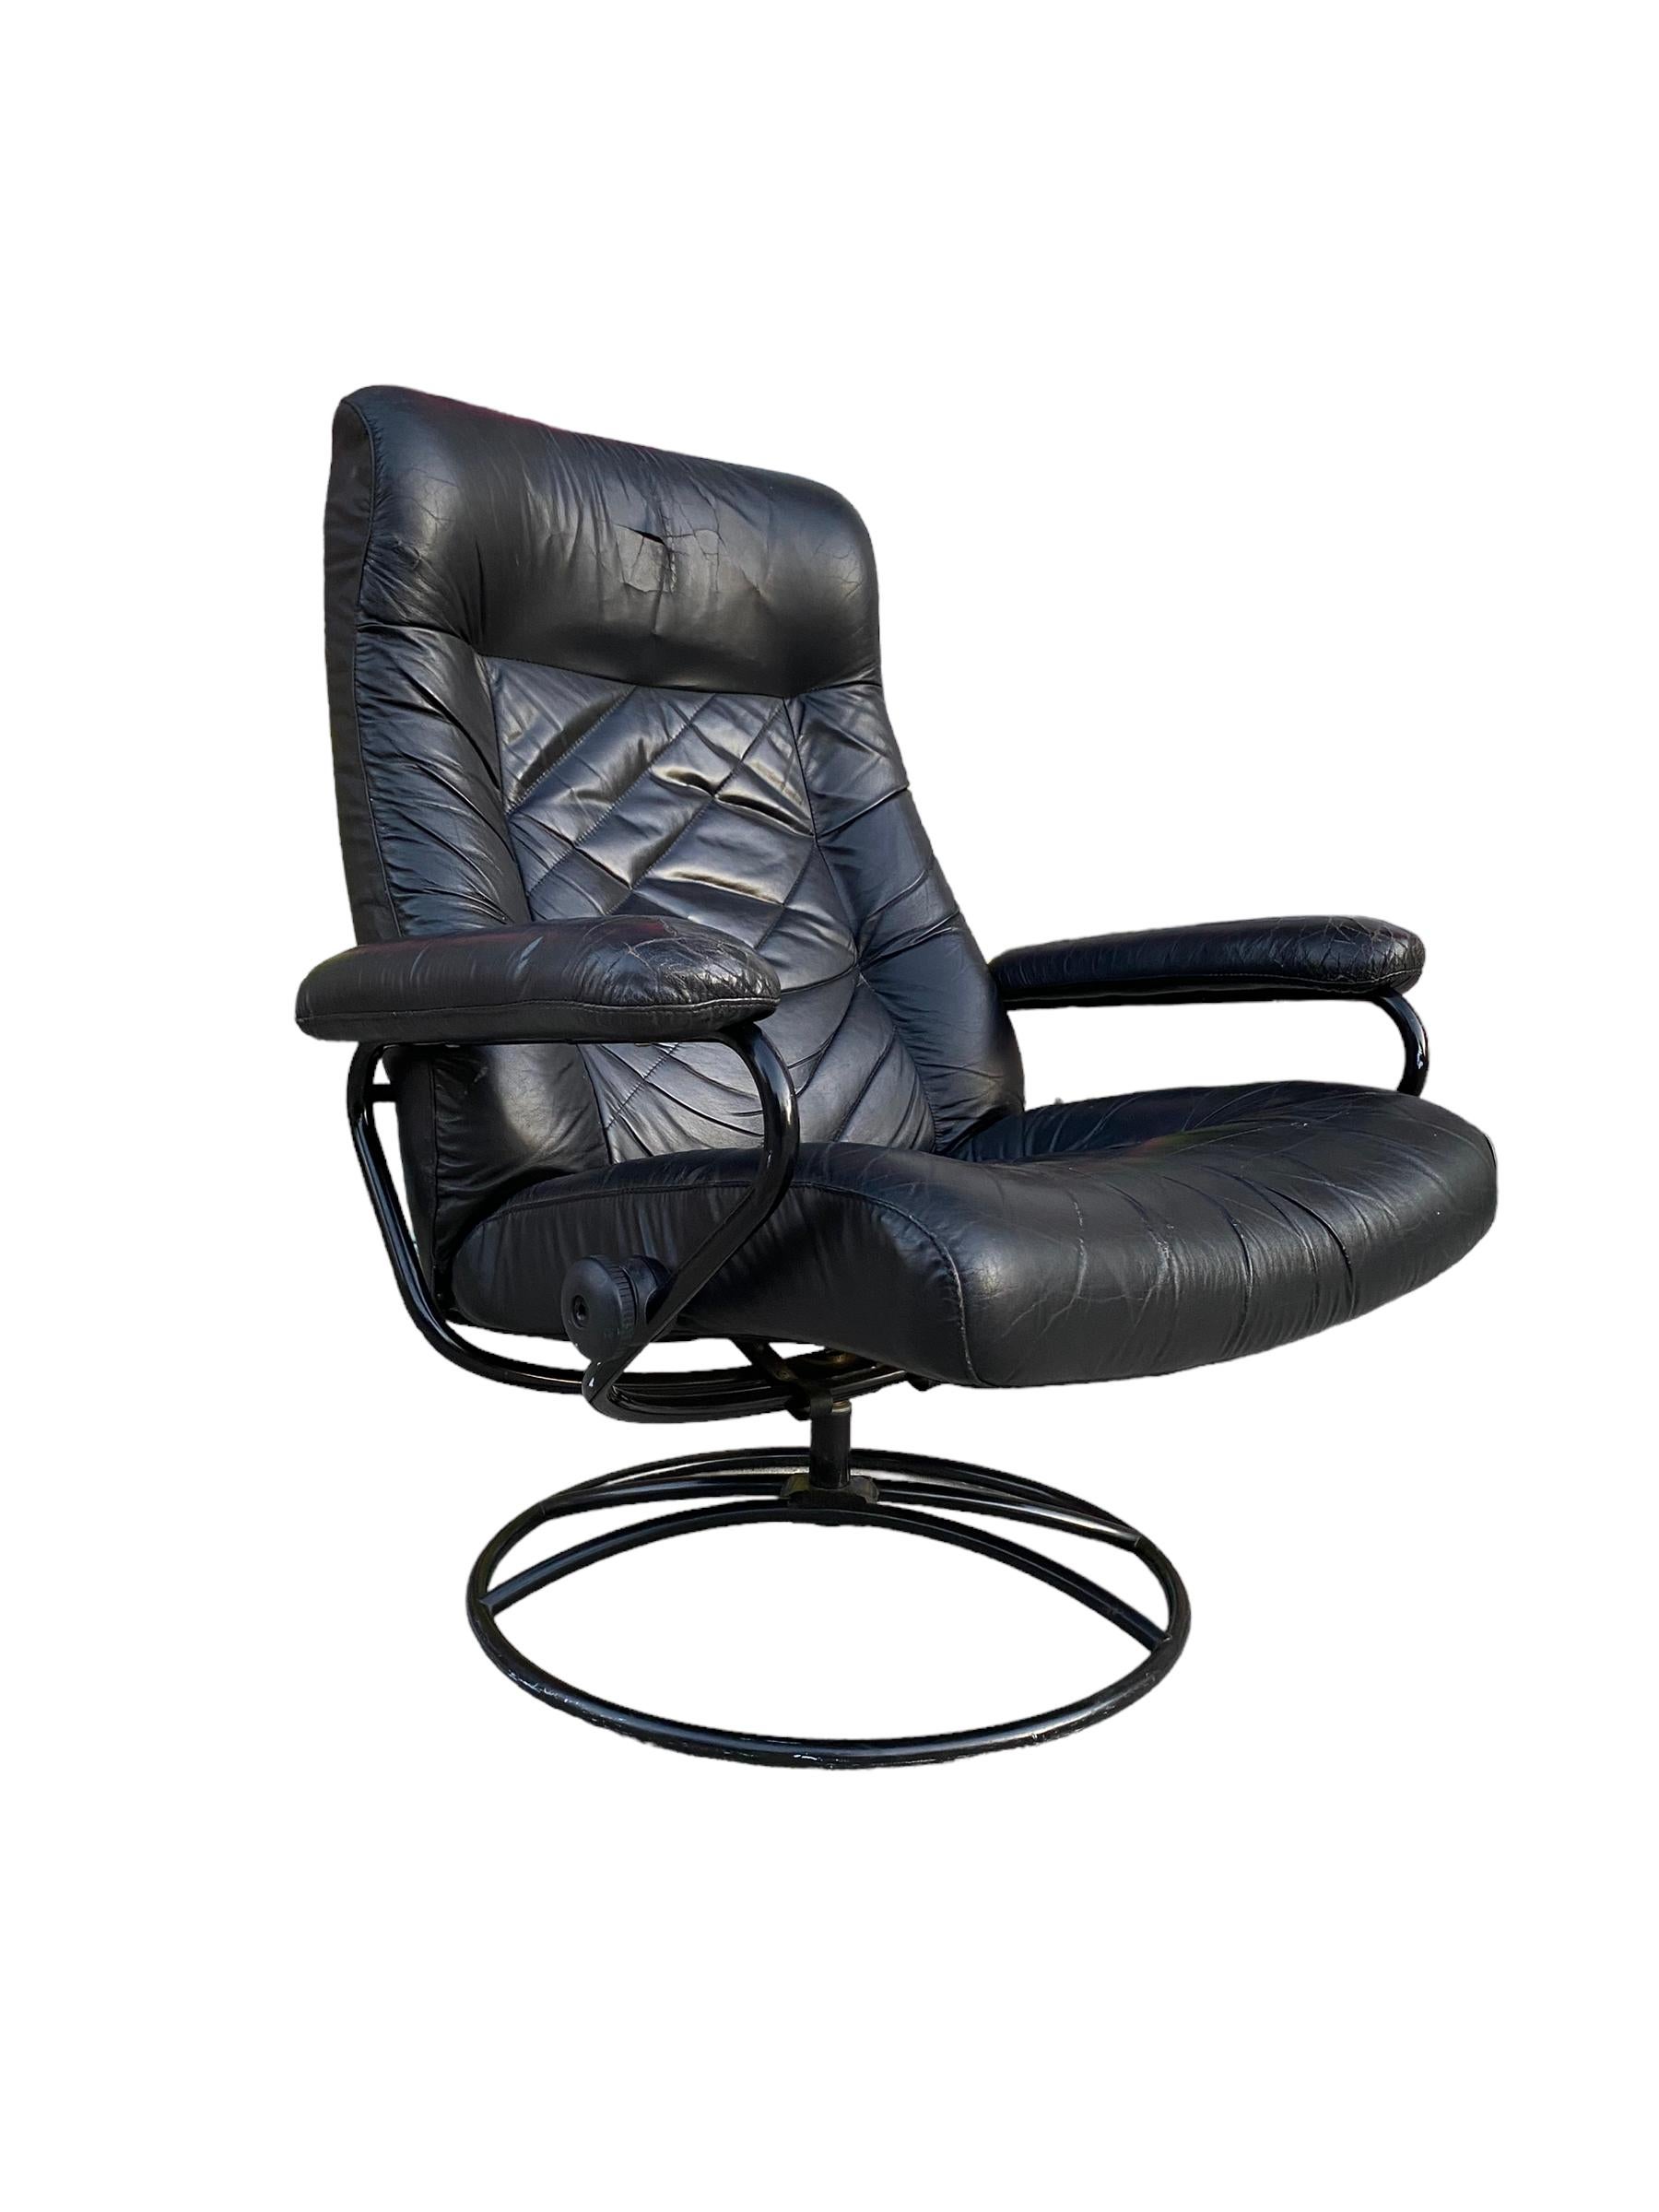 Norwegian Ekornes Stressless Reclining Lounge Chair and Ottoman in Black For Sale